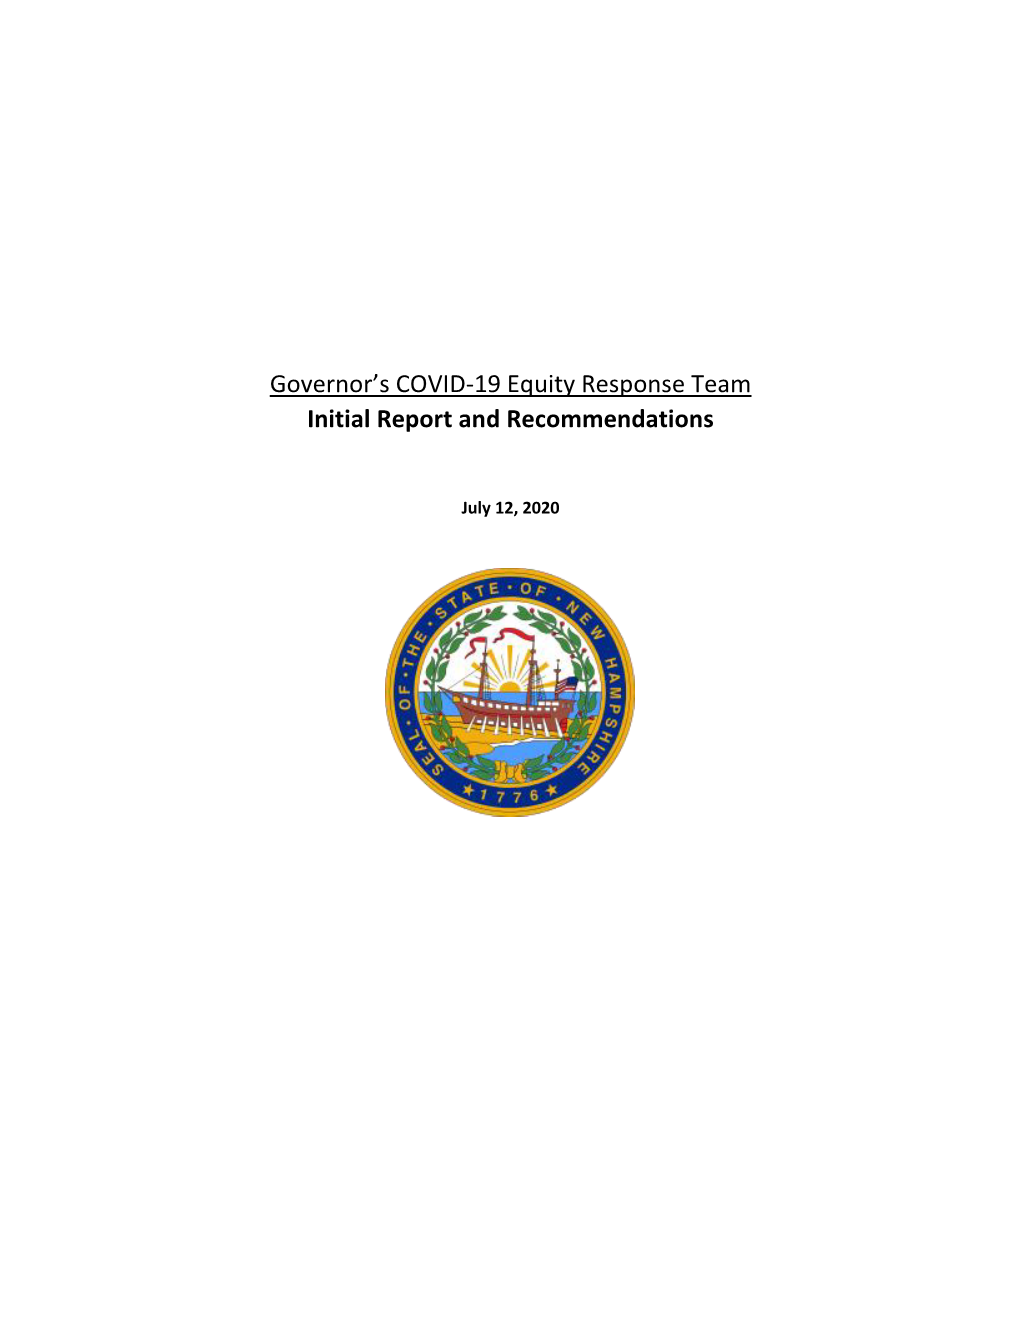 Governor's COVID-19 Health Equity Response Team Report